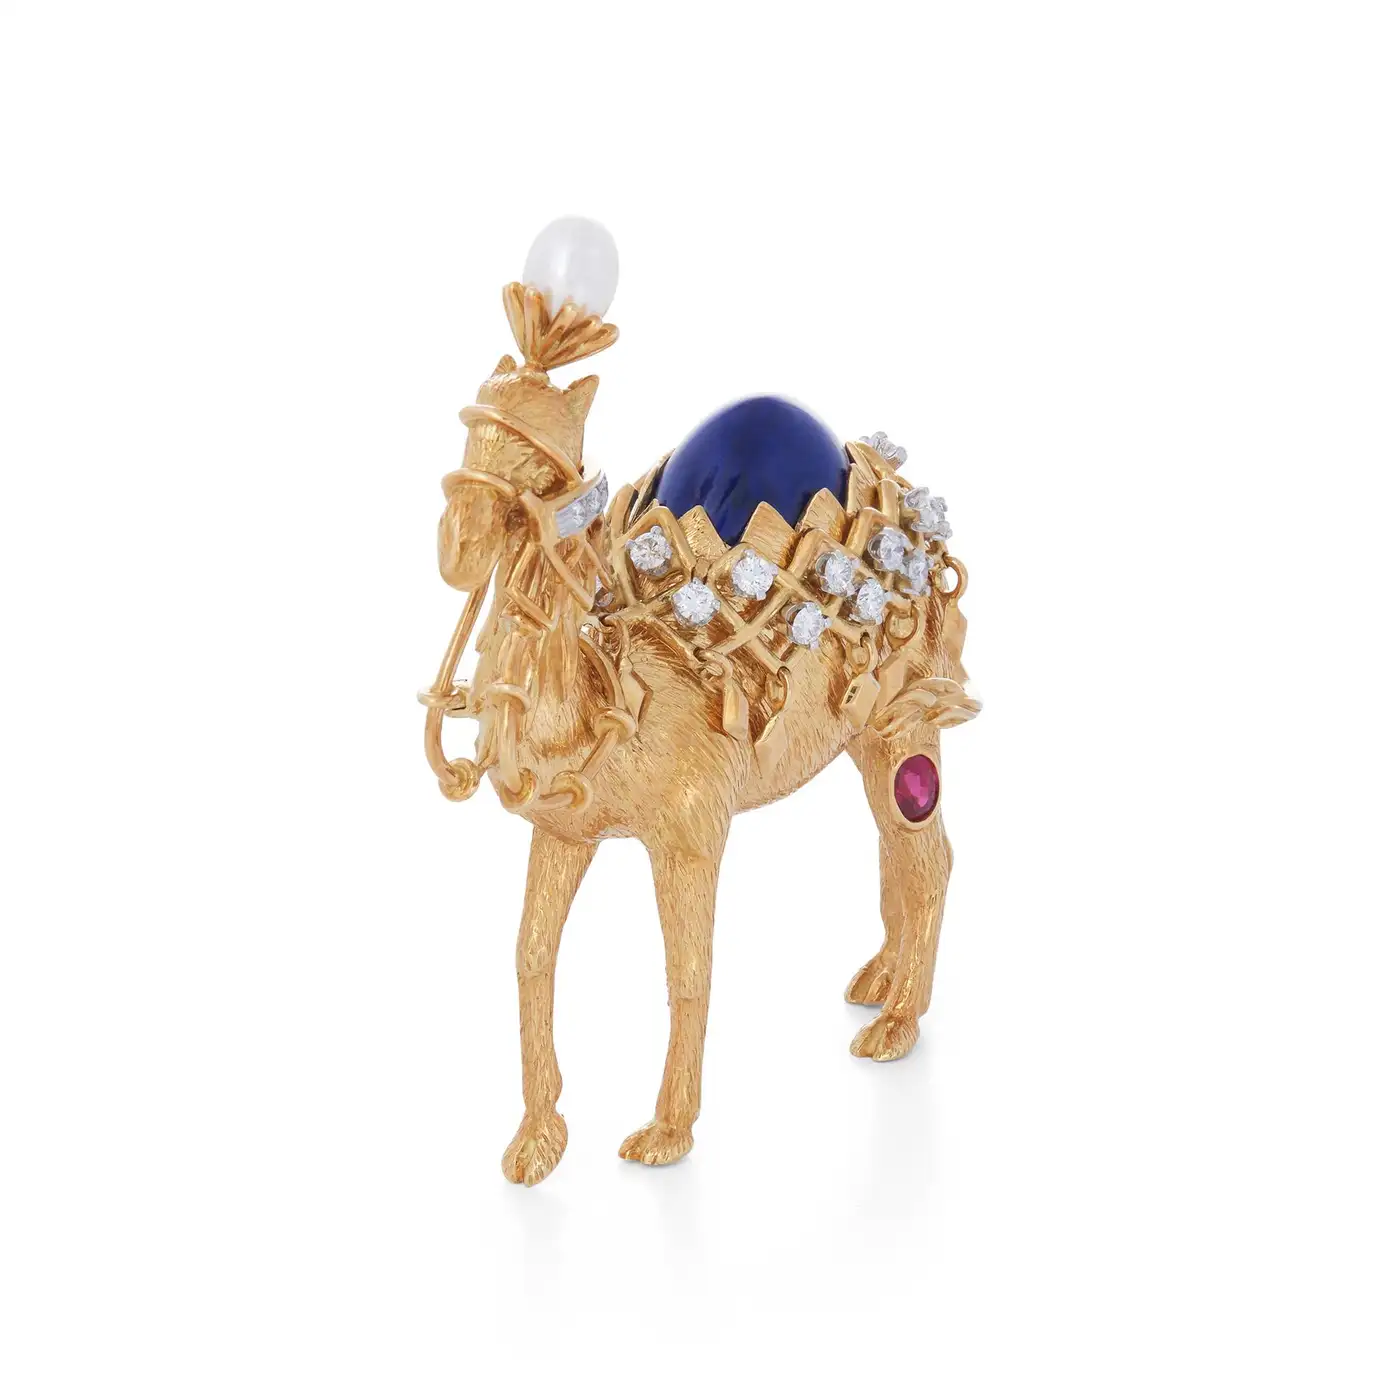 Diamond-and-Lapis-Lazuli-Camel-Brooch-Jean-Schlumberger-for-Tiffany-Co-6.webp